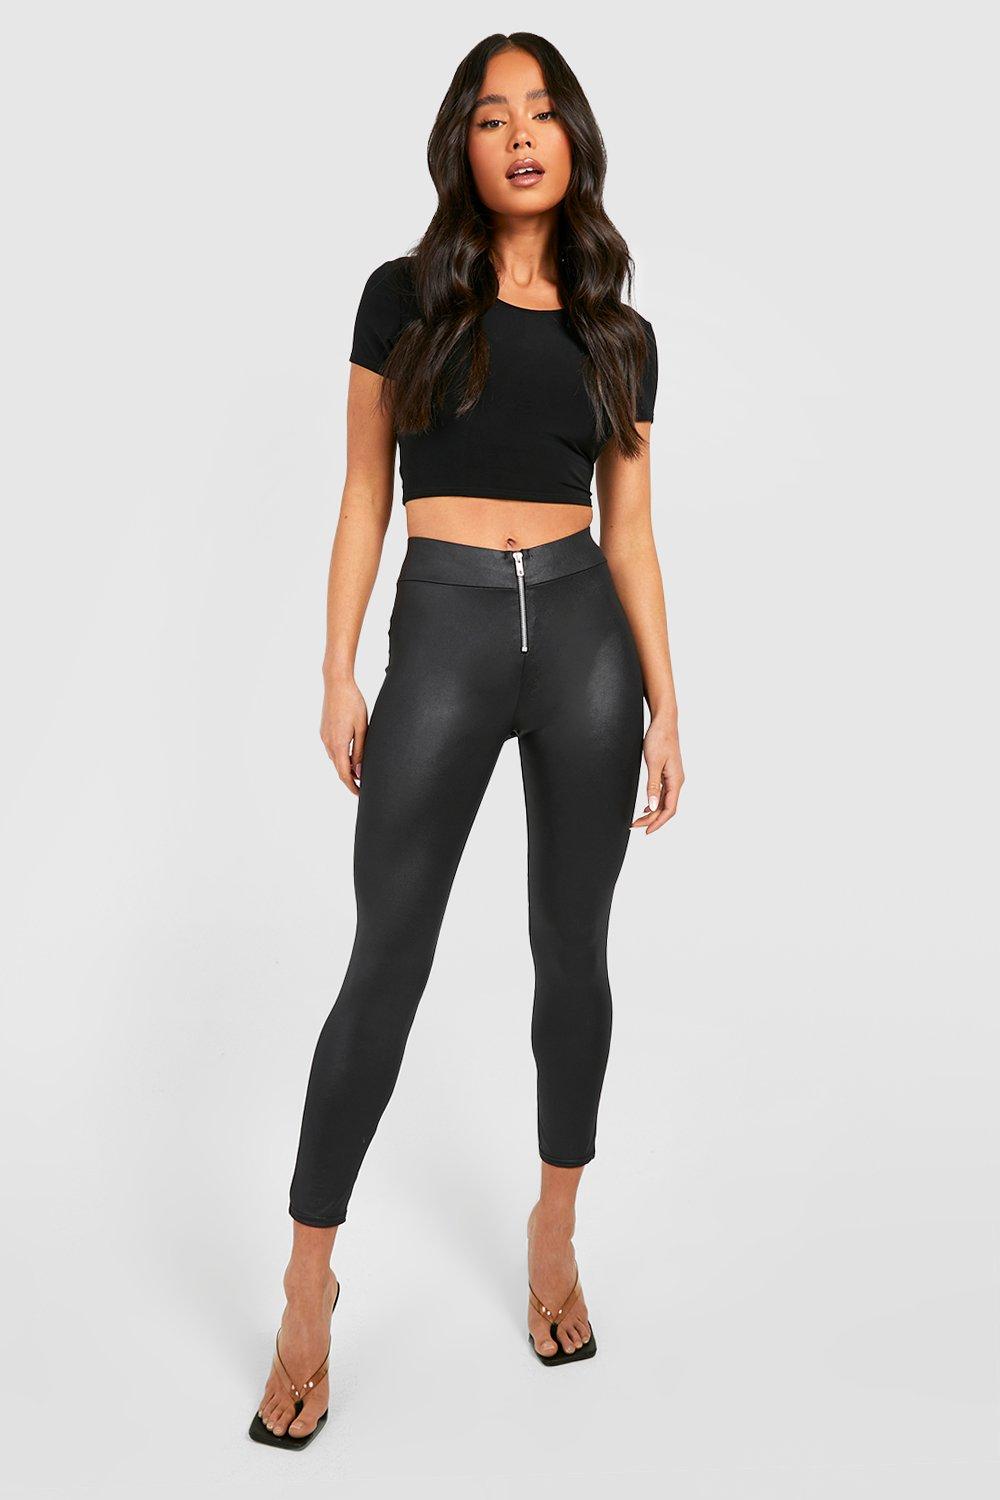 Buy Lipsy Black High Waist Leather Look Leggings from Next India